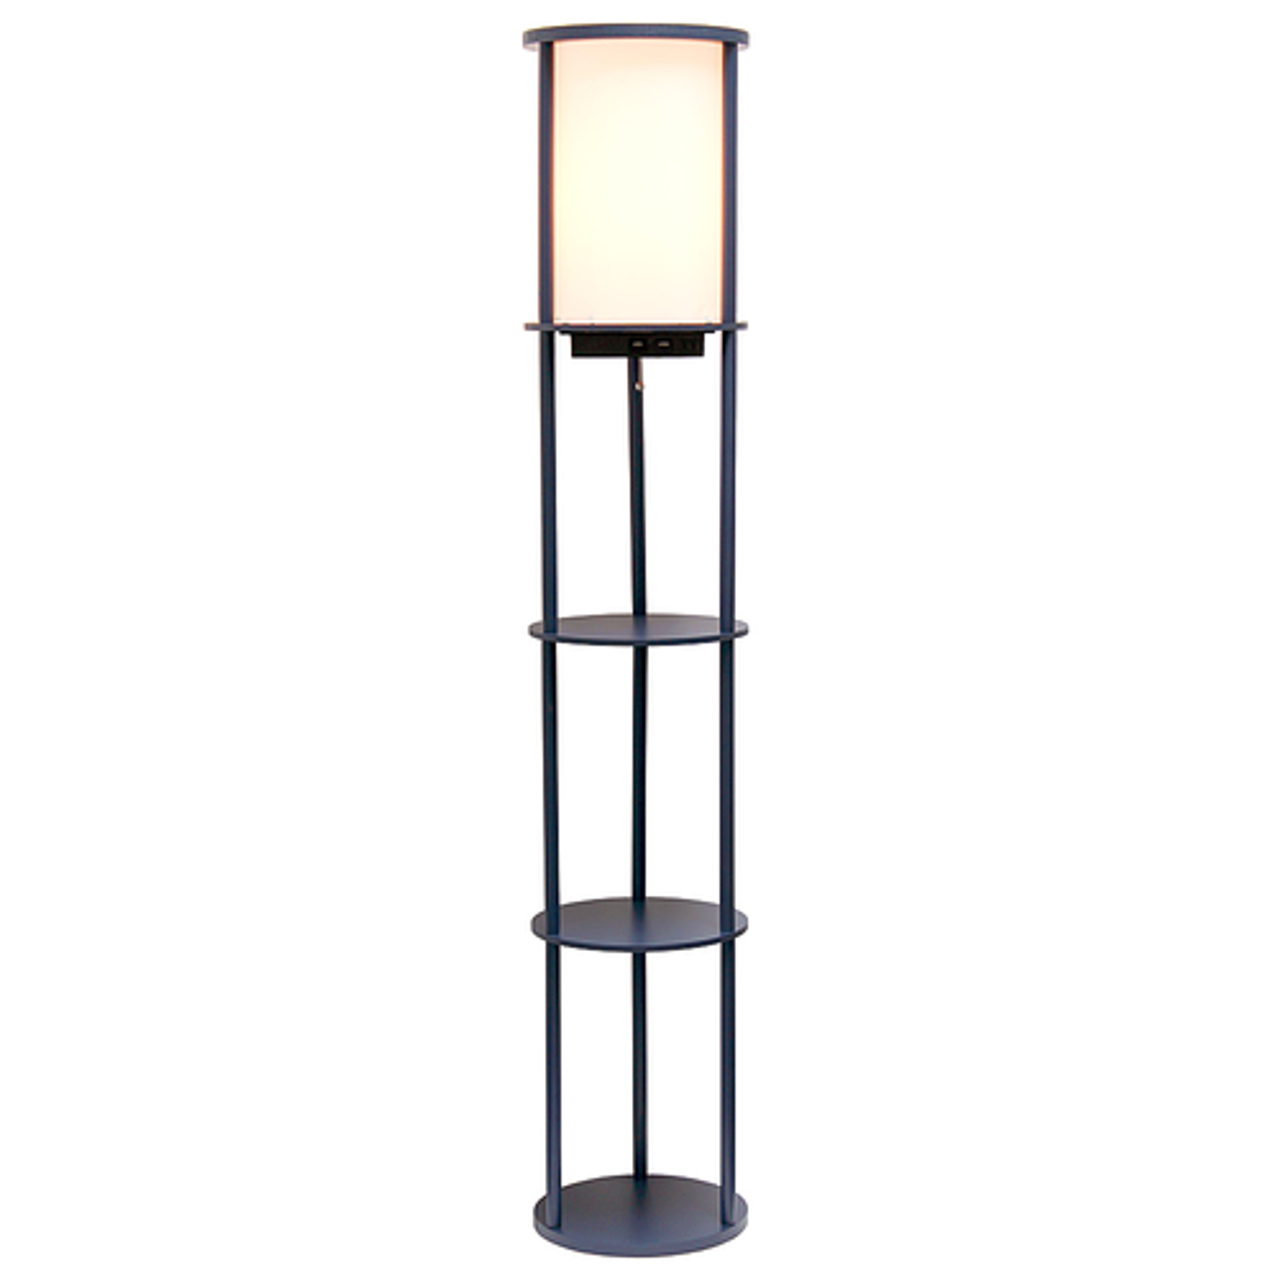 Simple Designs Round Etagere Storage Floor Lamp with 2 USB, 1 Outlet - Navy